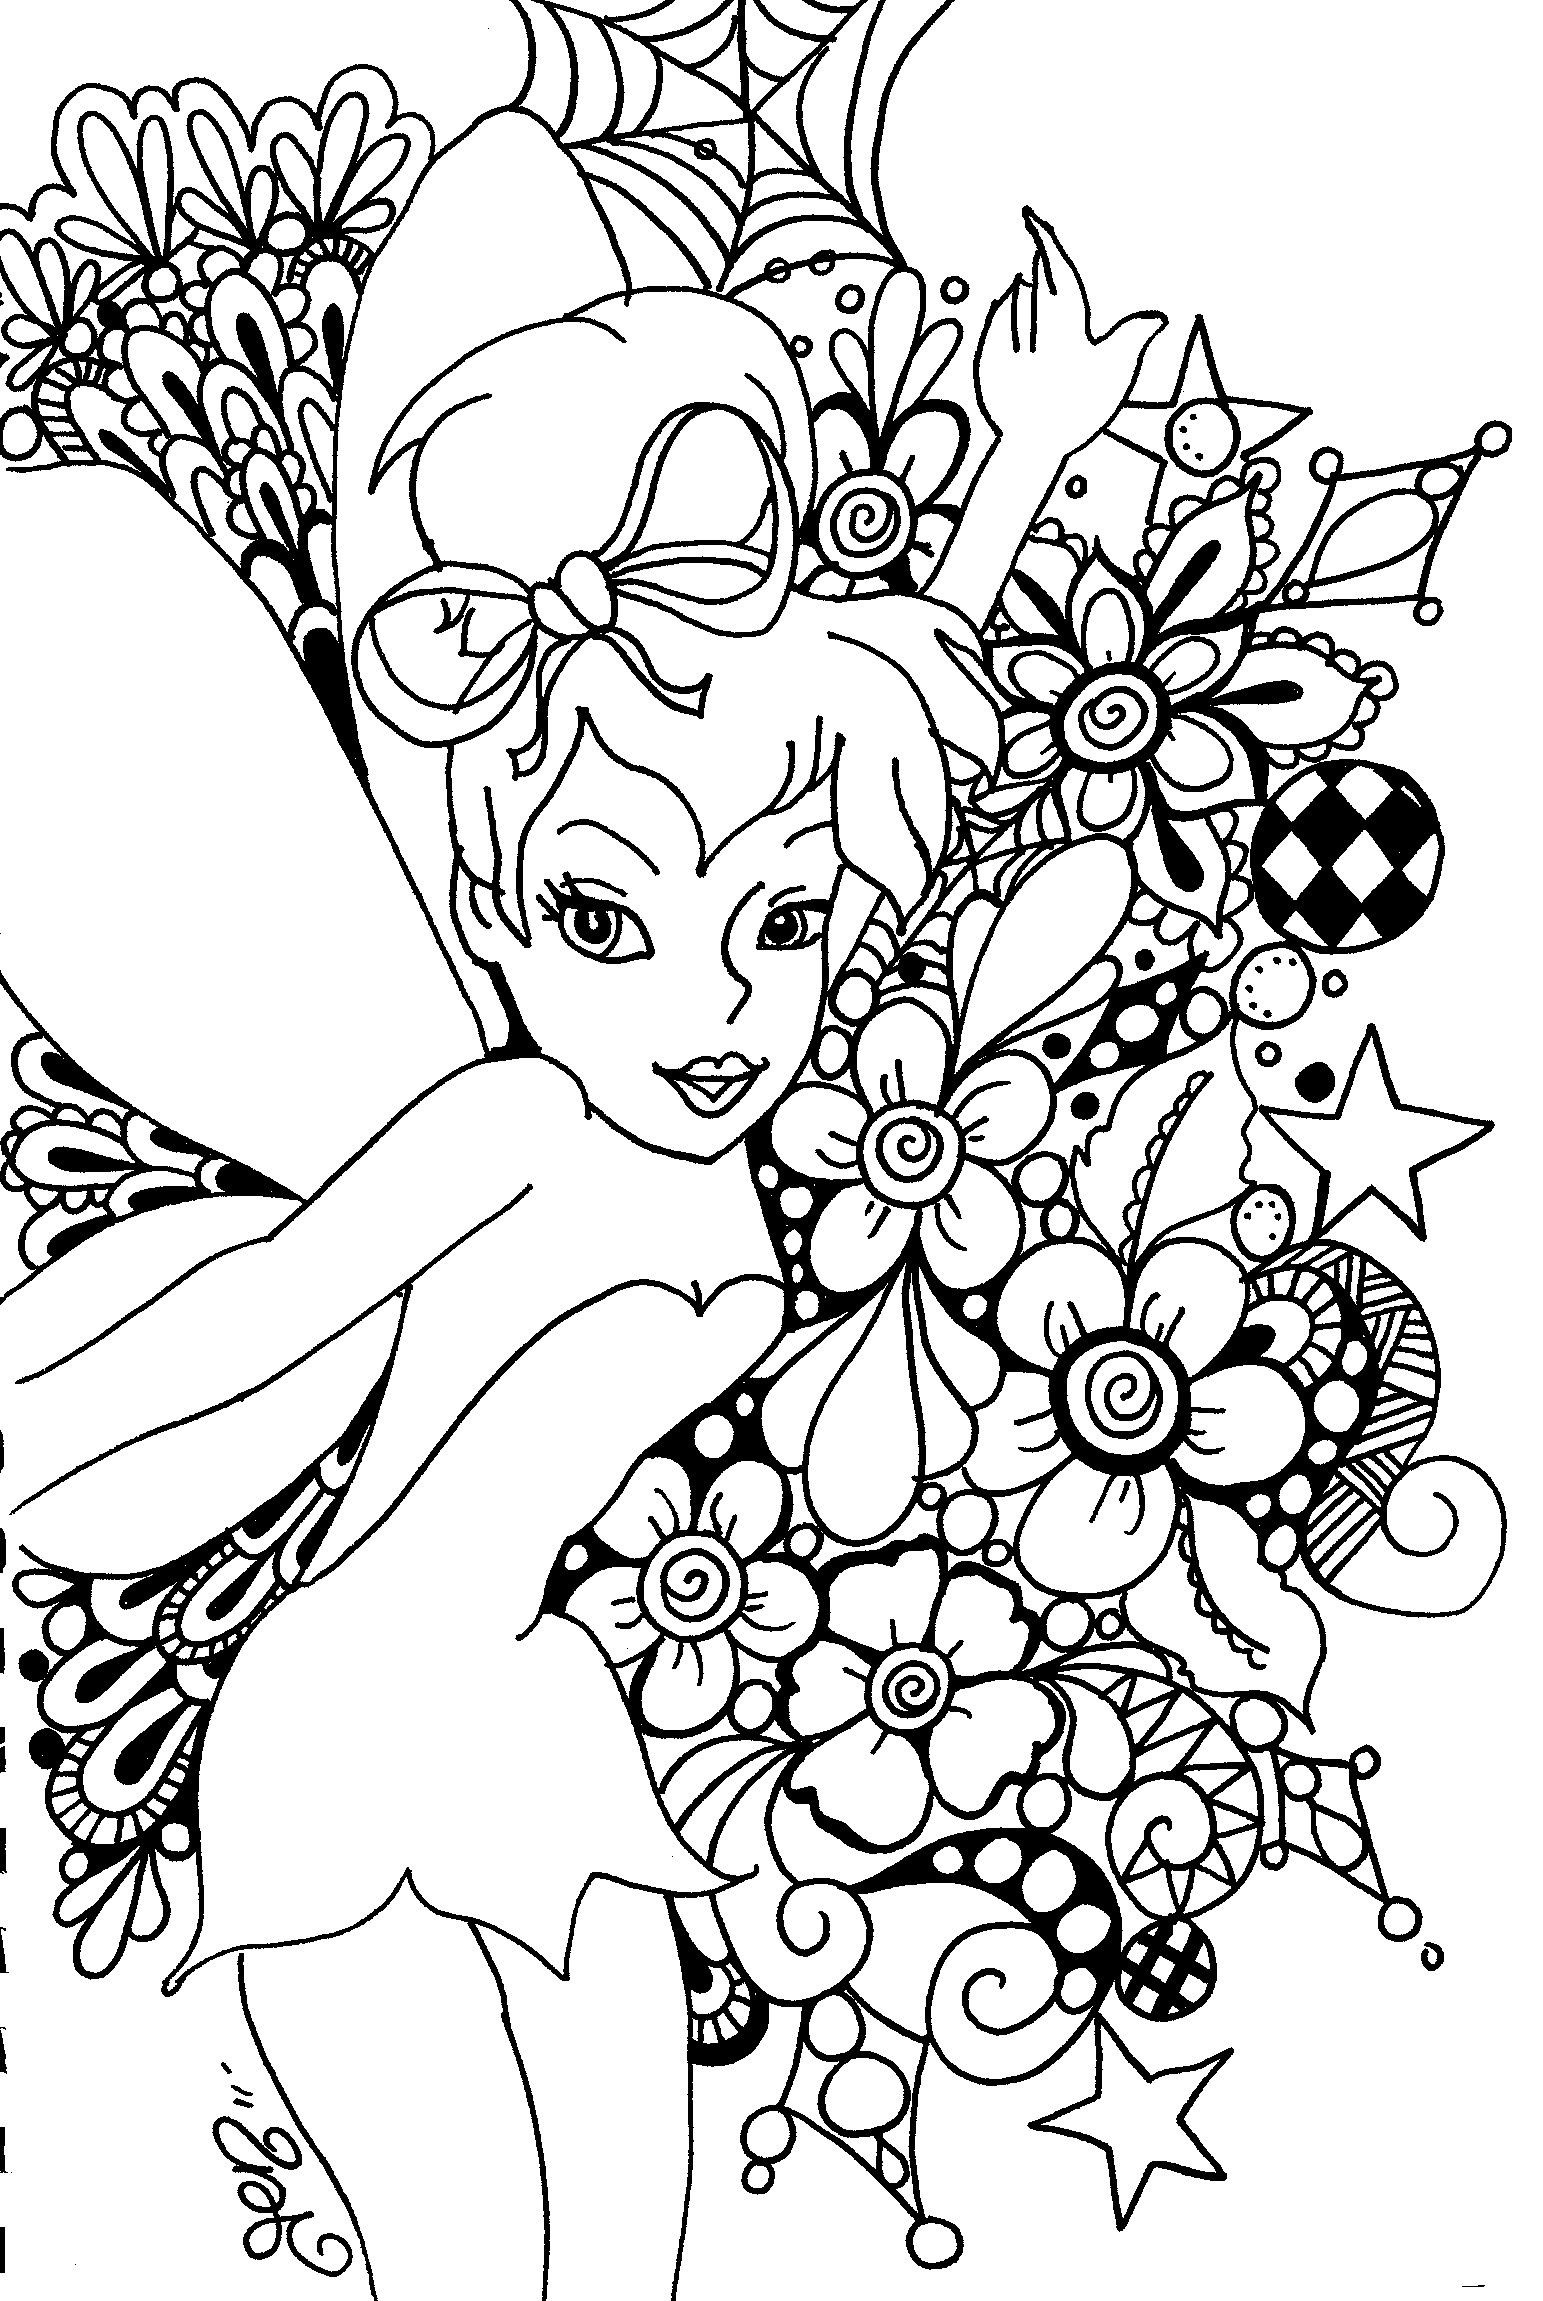 Free Printable Tinkerbell Coloring Pages For Kids | Art!! | Coloring - Tinkerbell Coloring Pages Printable Free